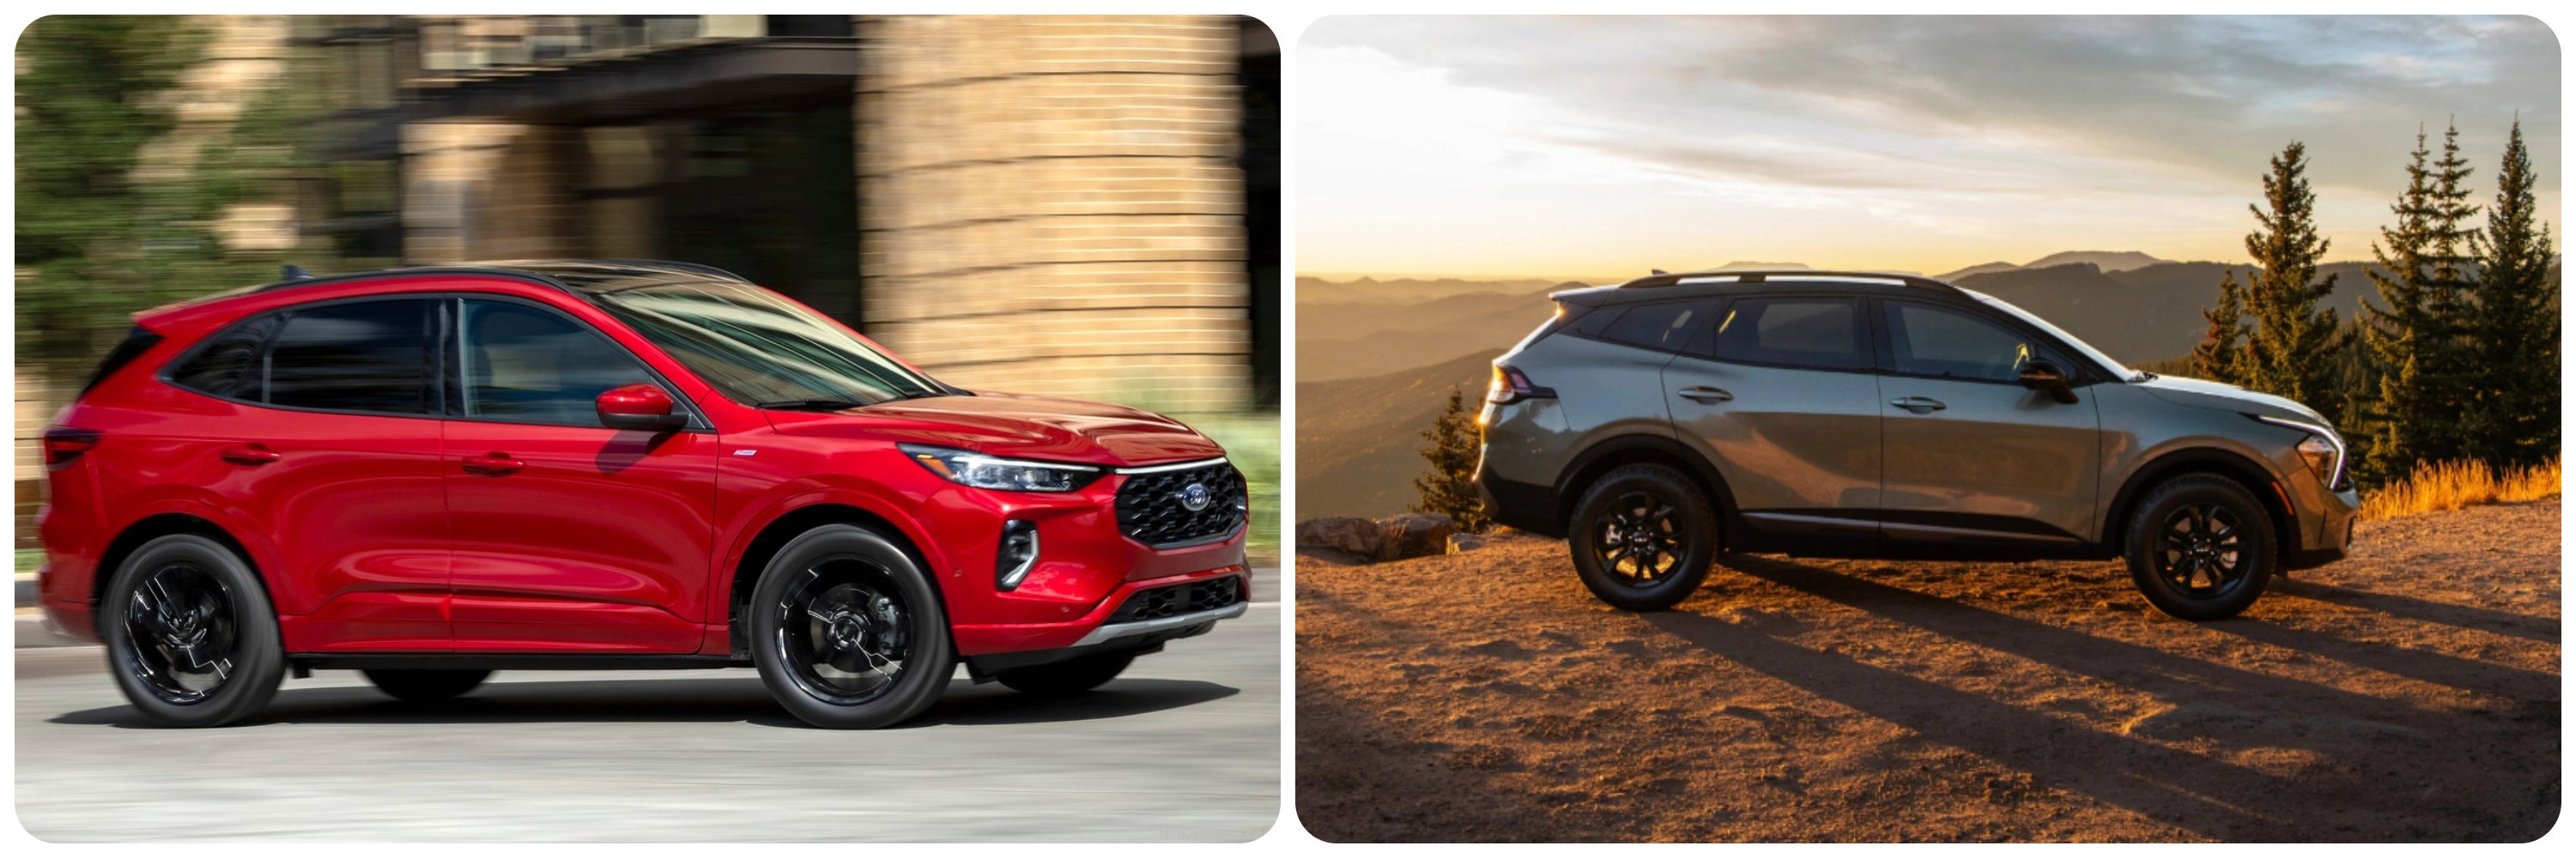 On the left a profile view of a red 2023 Ford Escape, and on the right a profile view of a gray 2023 Kia Sportage